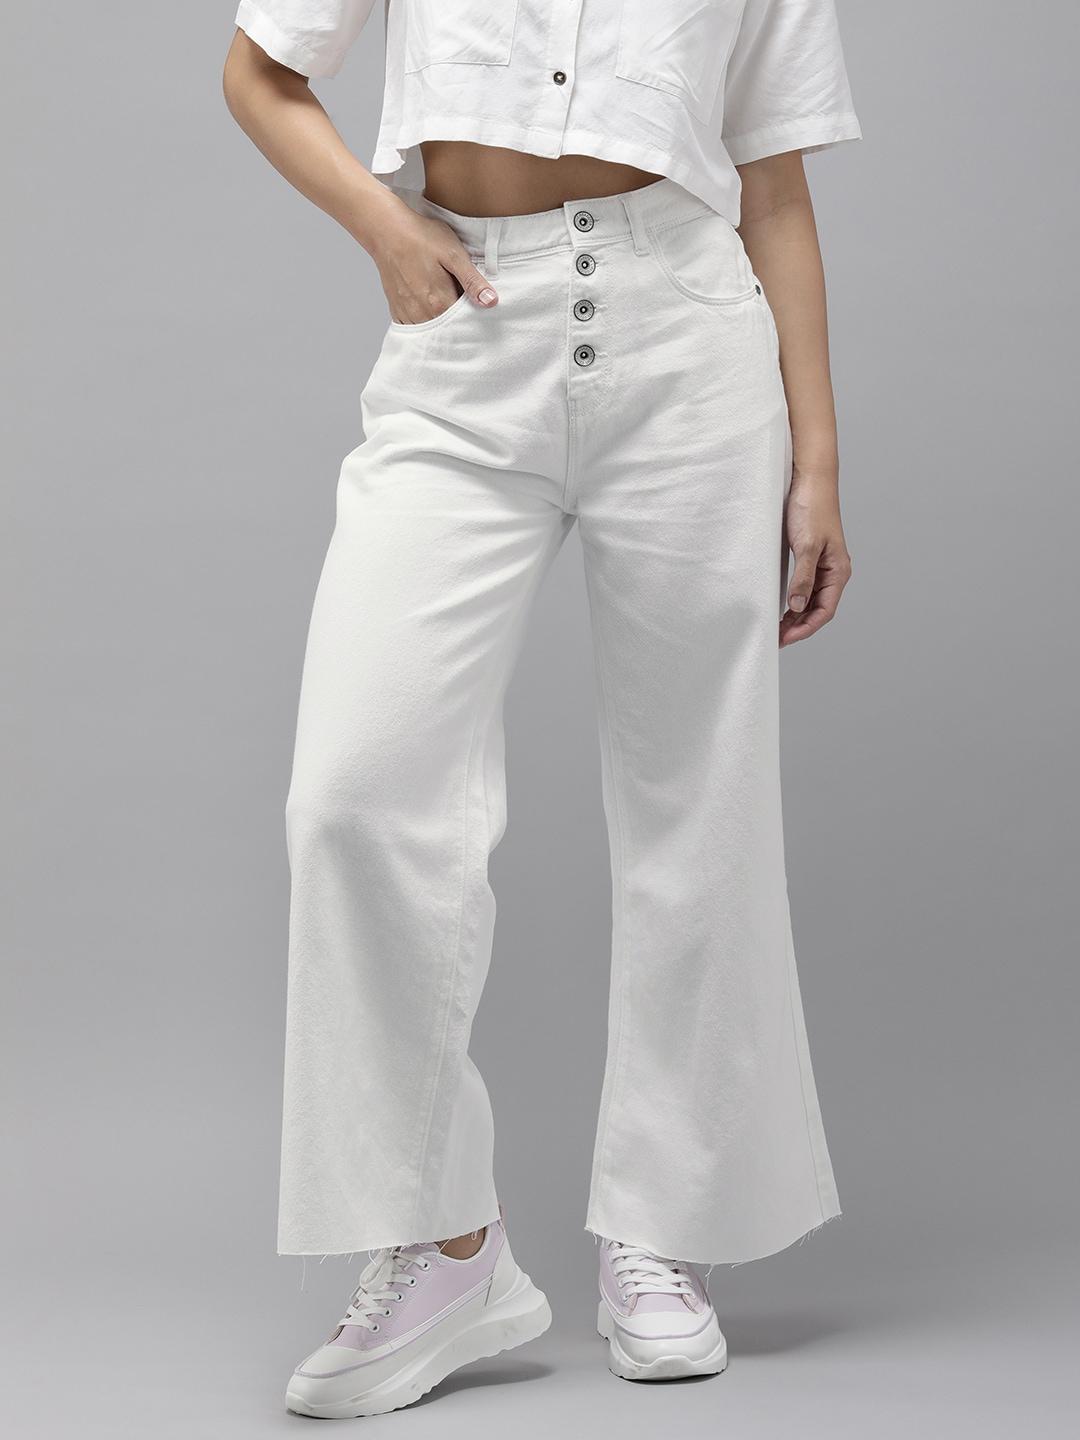 roadster-wide-leg-high-rise-pure-cotton-jeans